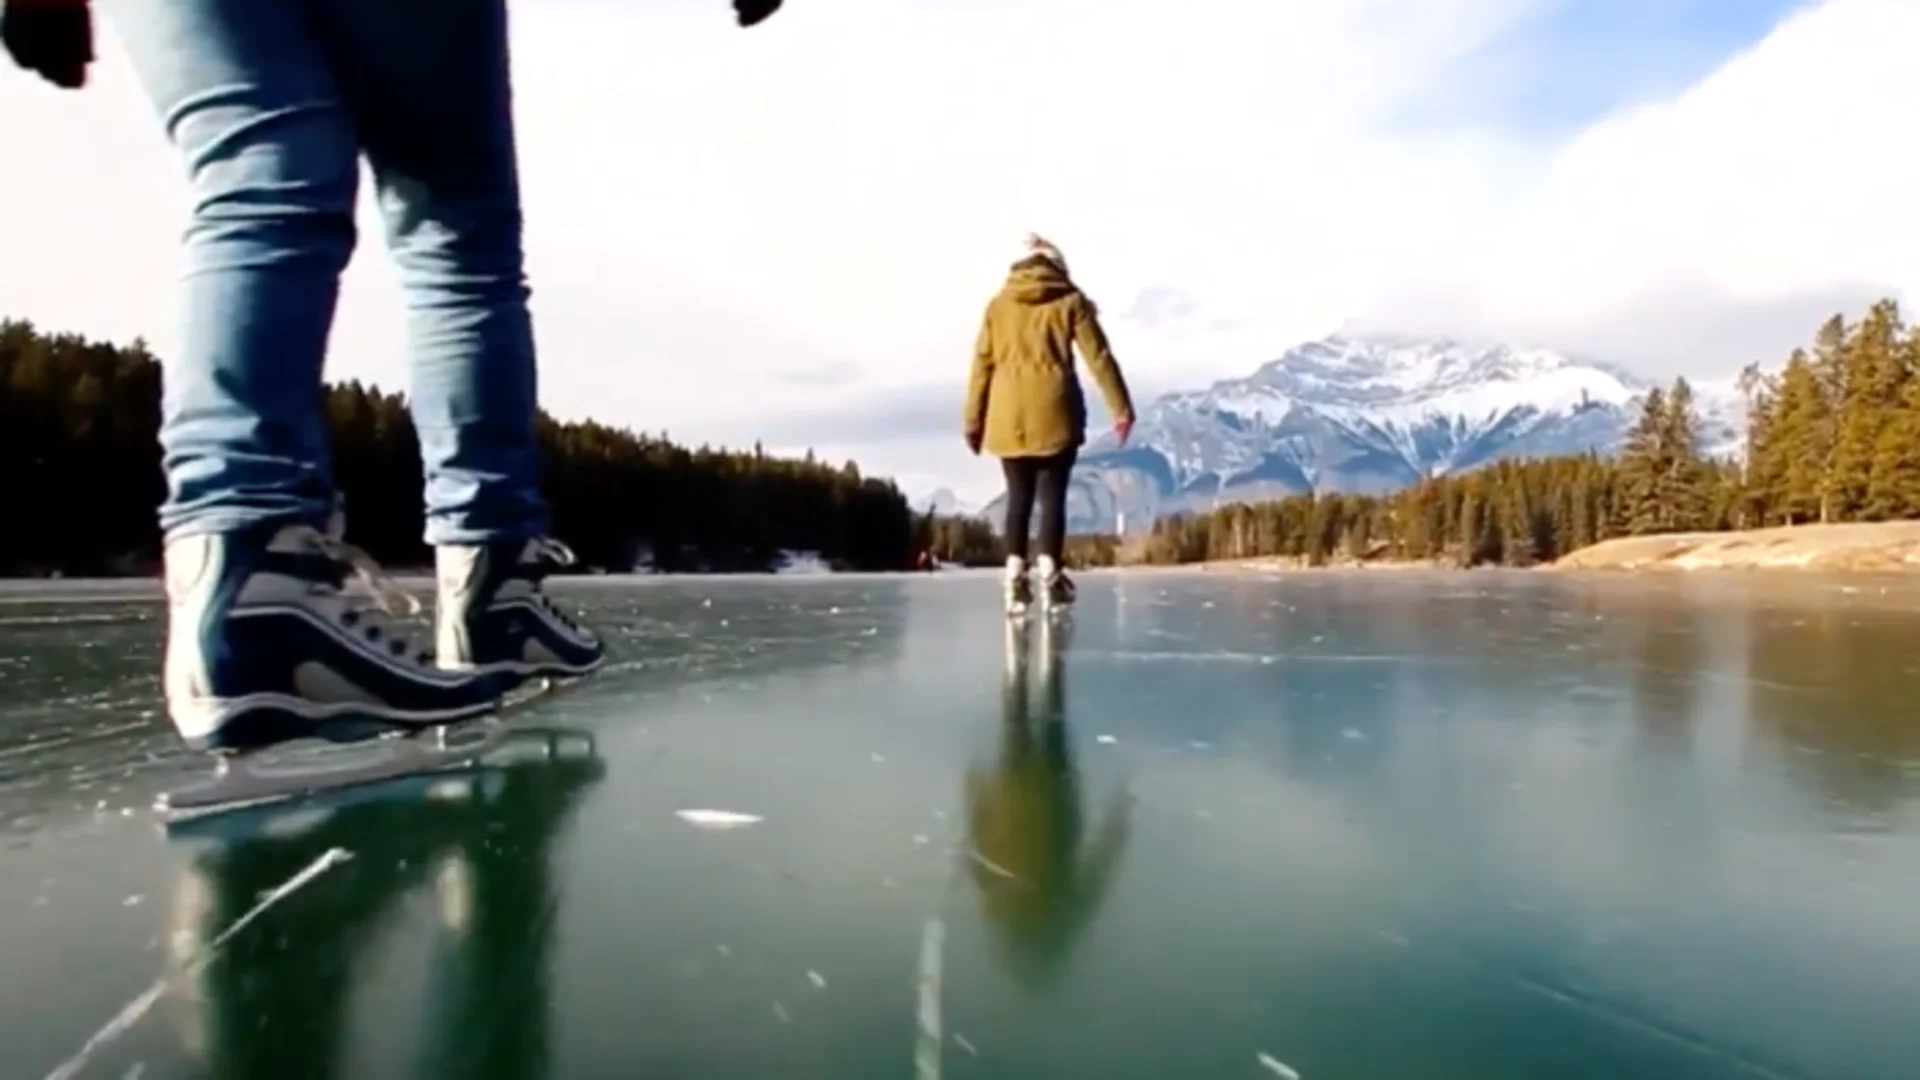 Multiple skaters fall through ice in Banff